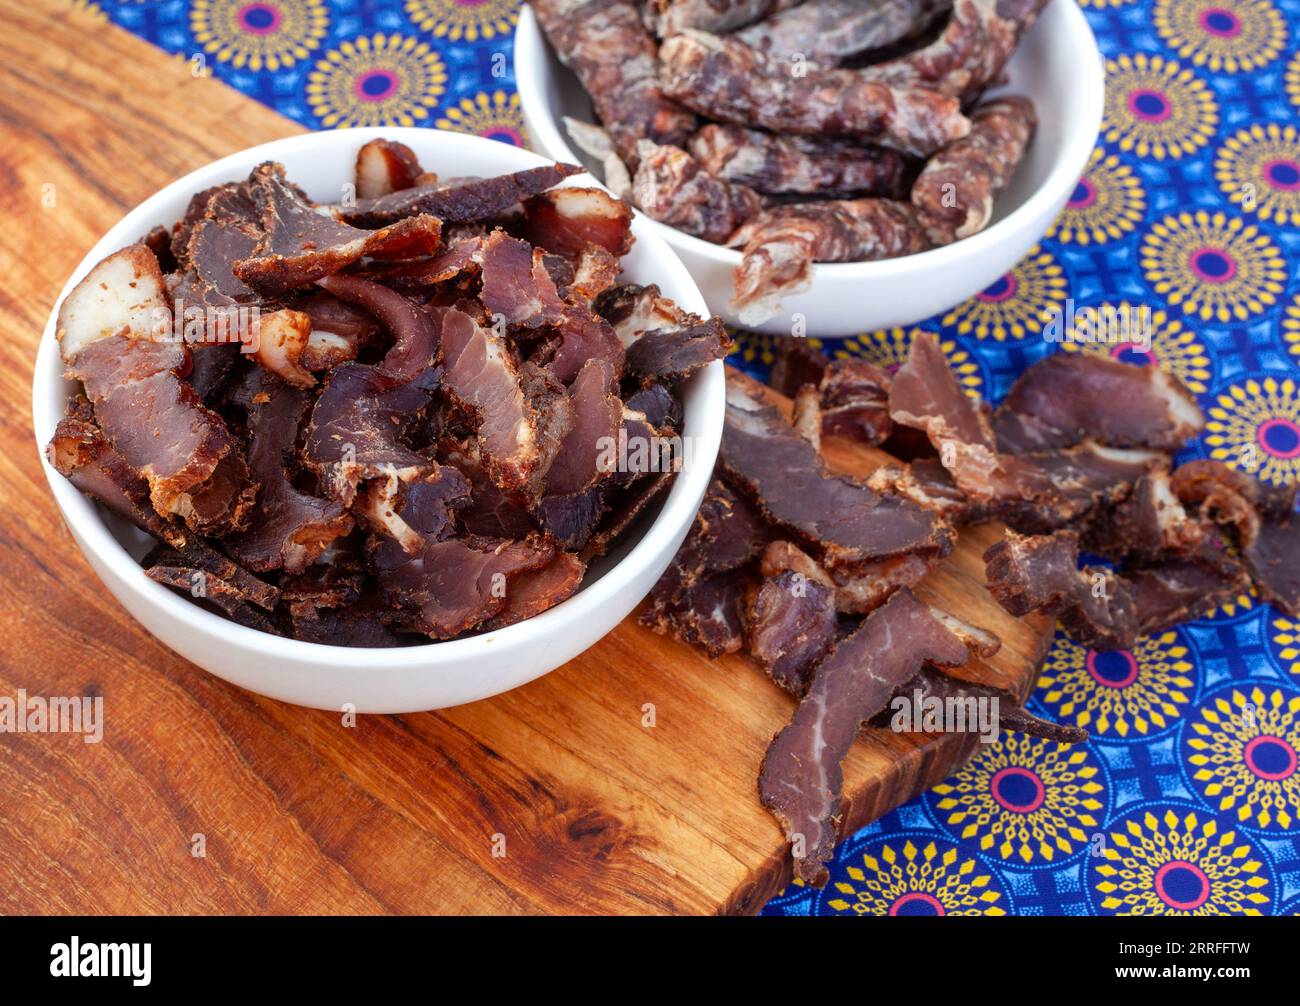 South African Traditional Biltong And Dry Wors On Blue Traditional Printed Cloth Stock Photo Alamy